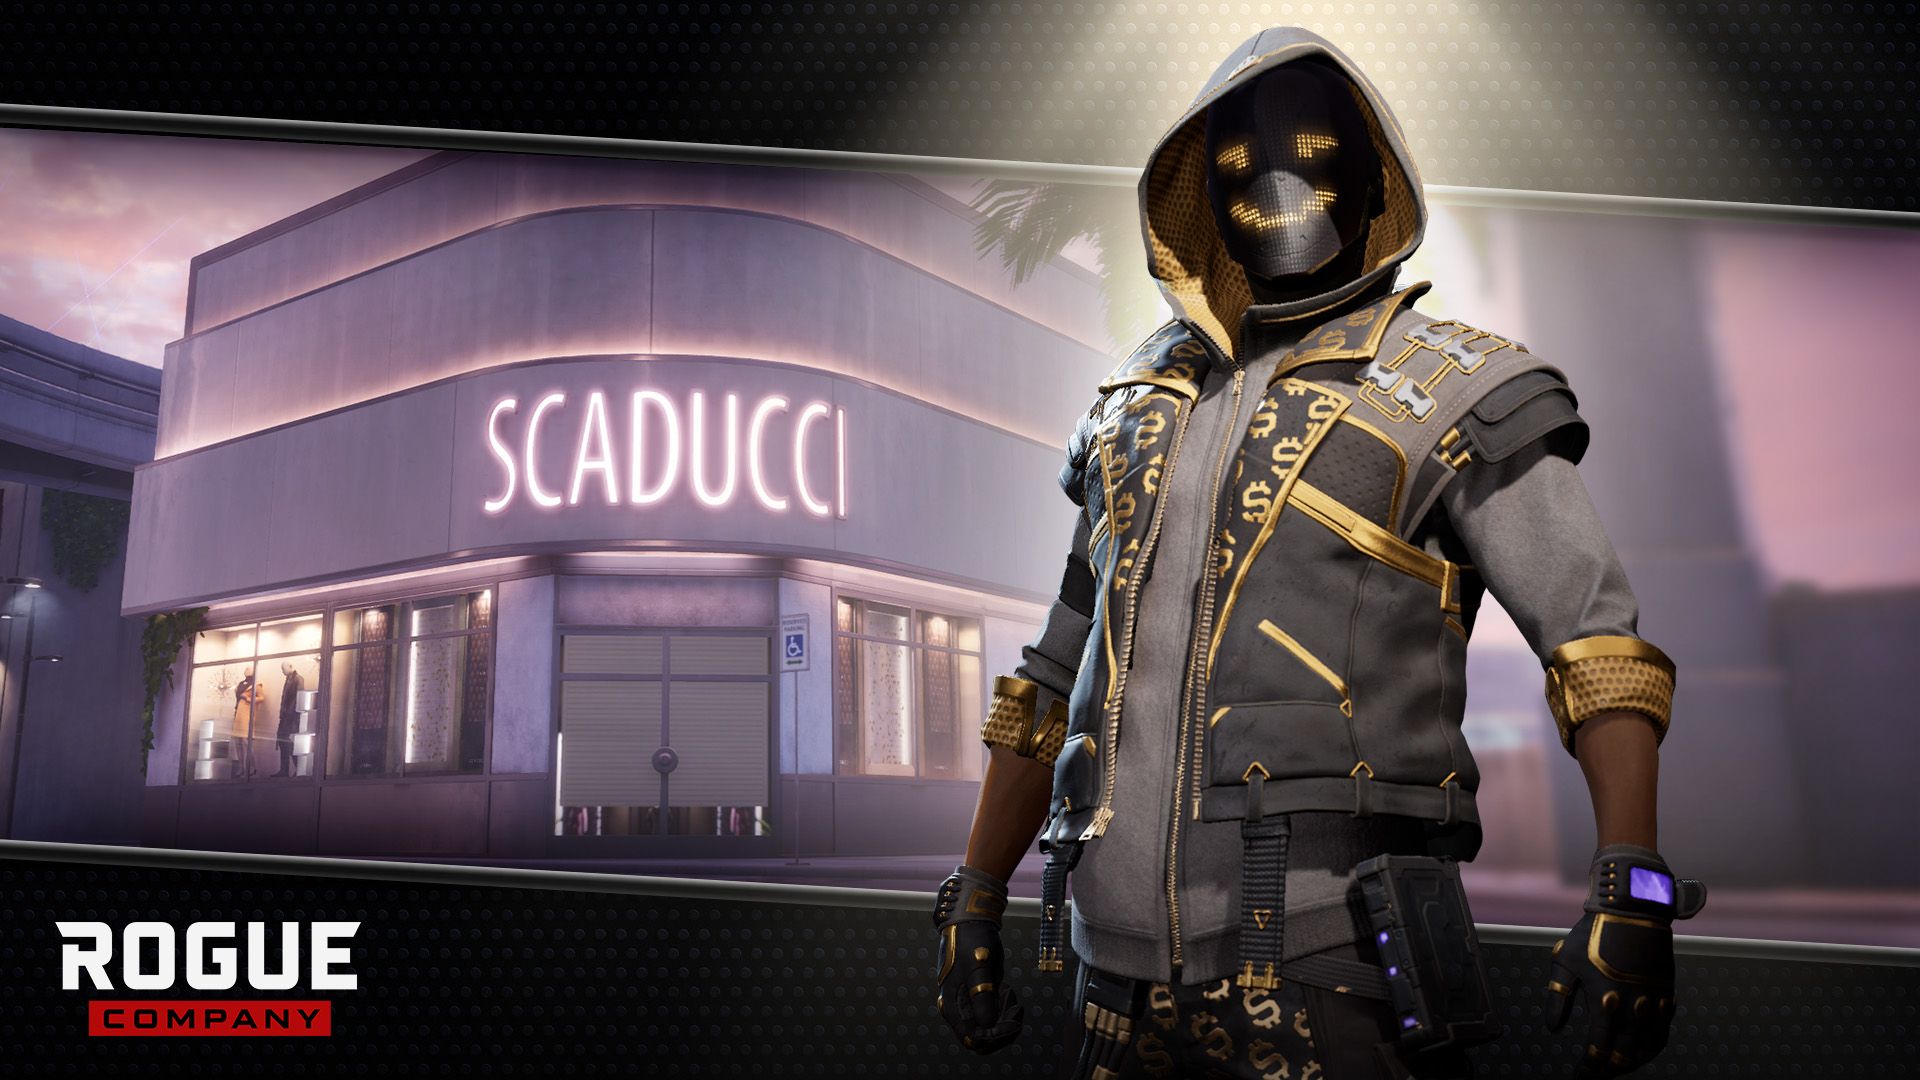 Rogue Company the streets of Vice, there's only one hacker worthy of Miami's greatest threads. Pick up Scaducci Gl1tch in the Store today!